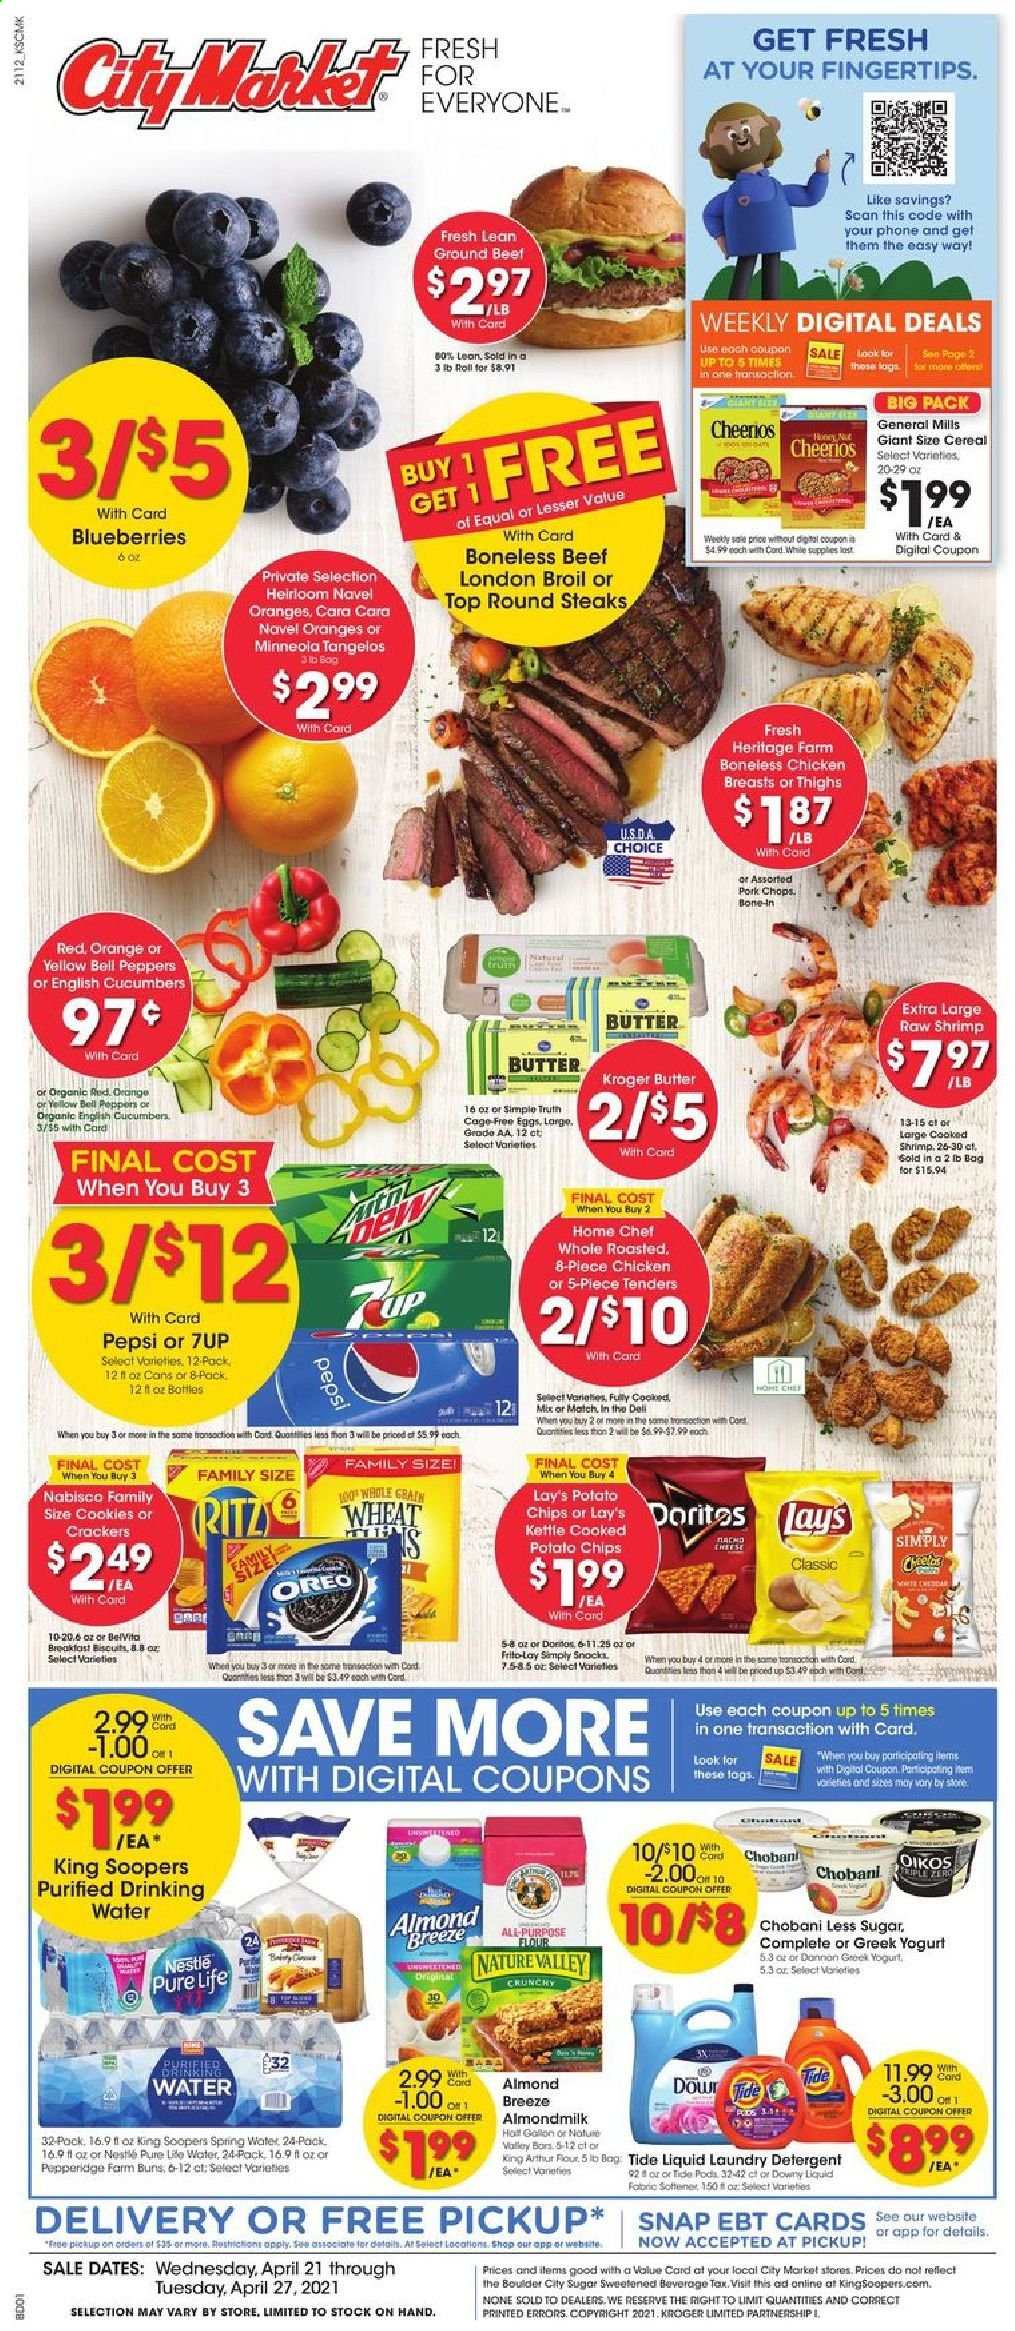 thumbnail - City Market Flyer - 04/21/2021 - 04/27/2021 - Sales products - tangelos, buns, bell peppers, cucumber, peppers, blueberries, oranges, shrimps, greek yoghurt, Oreo, yoghurt, Oikos, Chobani, almond milk, eggs, cage free eggs, butter, cookies, Nestlé, crackers, RITZ, Doritos, potato chips, chips, Lay’s, Frito-Lay, cereals, Cheerios, belVita, Nature Valley, Pepsi, 7UP, spring water, chicken breasts, beef meat, ground beef, steak, pork chops, pork meat, detergent, Tide, fabric softener, laundry detergent, Downy Laundry, navel oranges. Page 1.